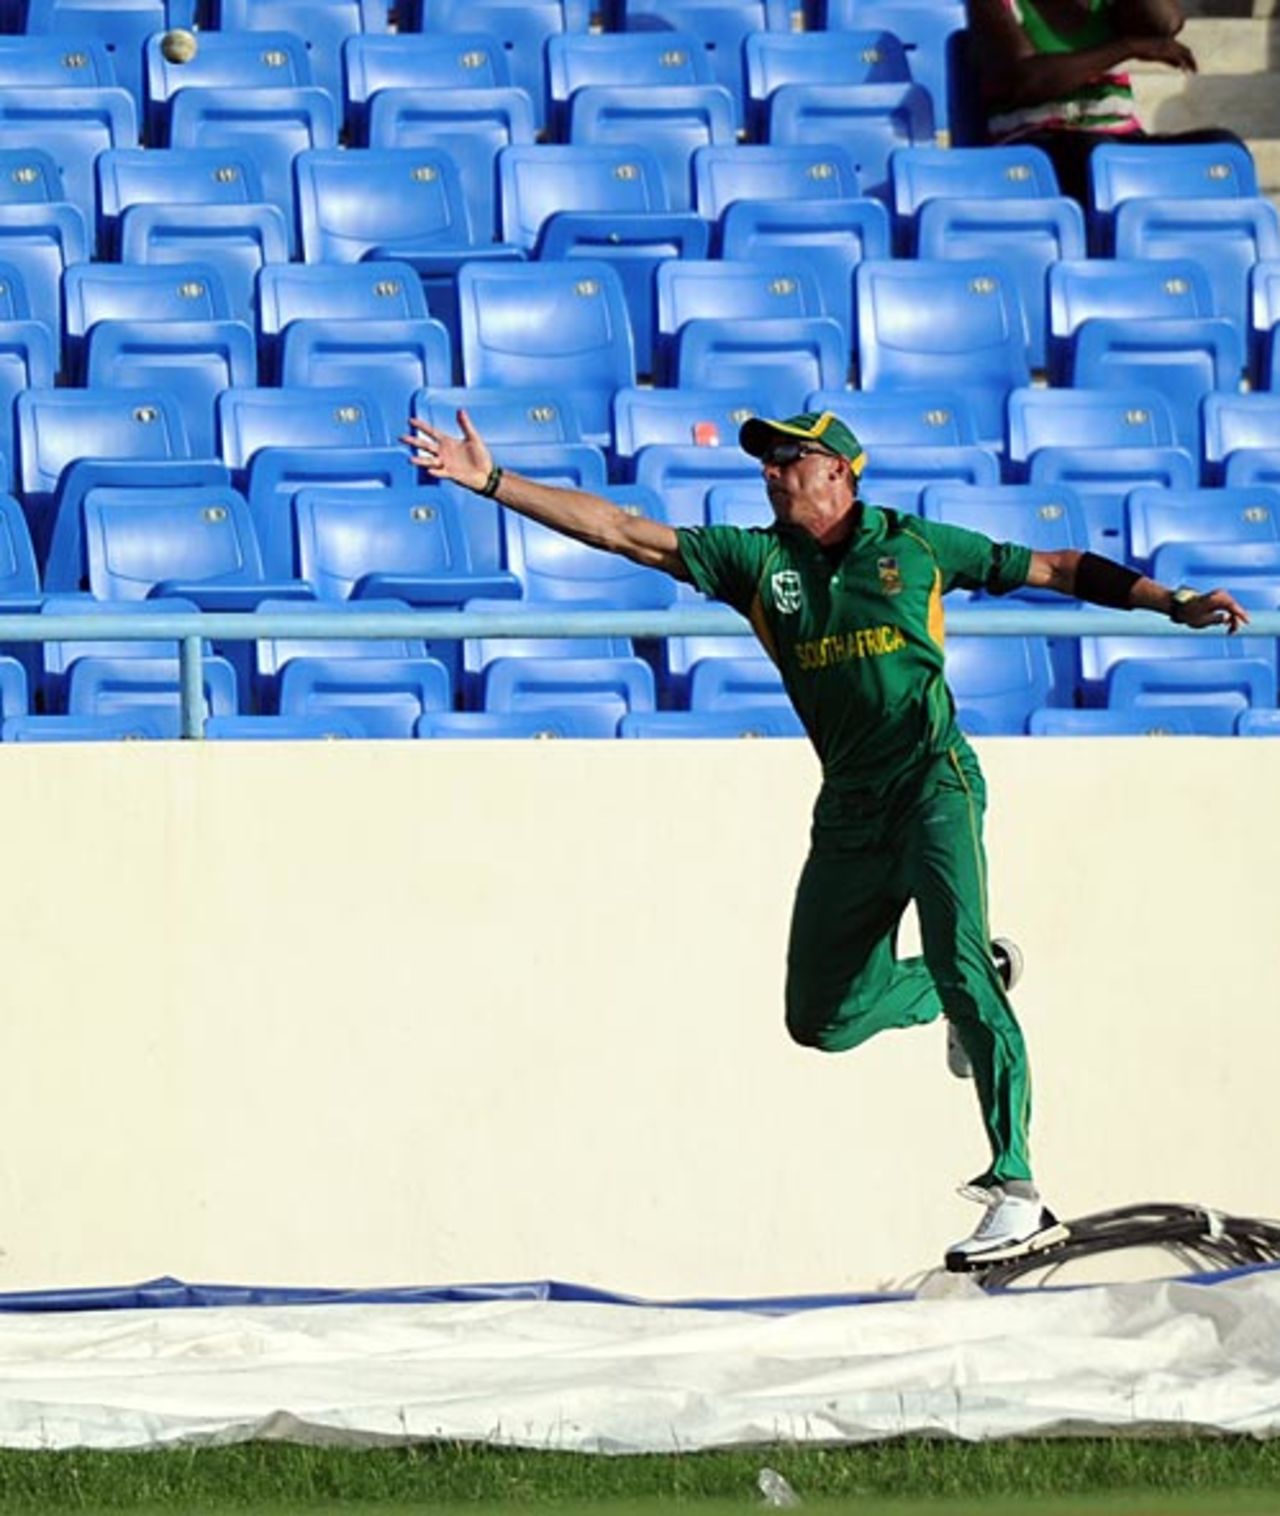 Dale Steyn leaps but the ball flies over him, West Indies v South Africa, 2nd ODI, Antigua, May 24, 2010